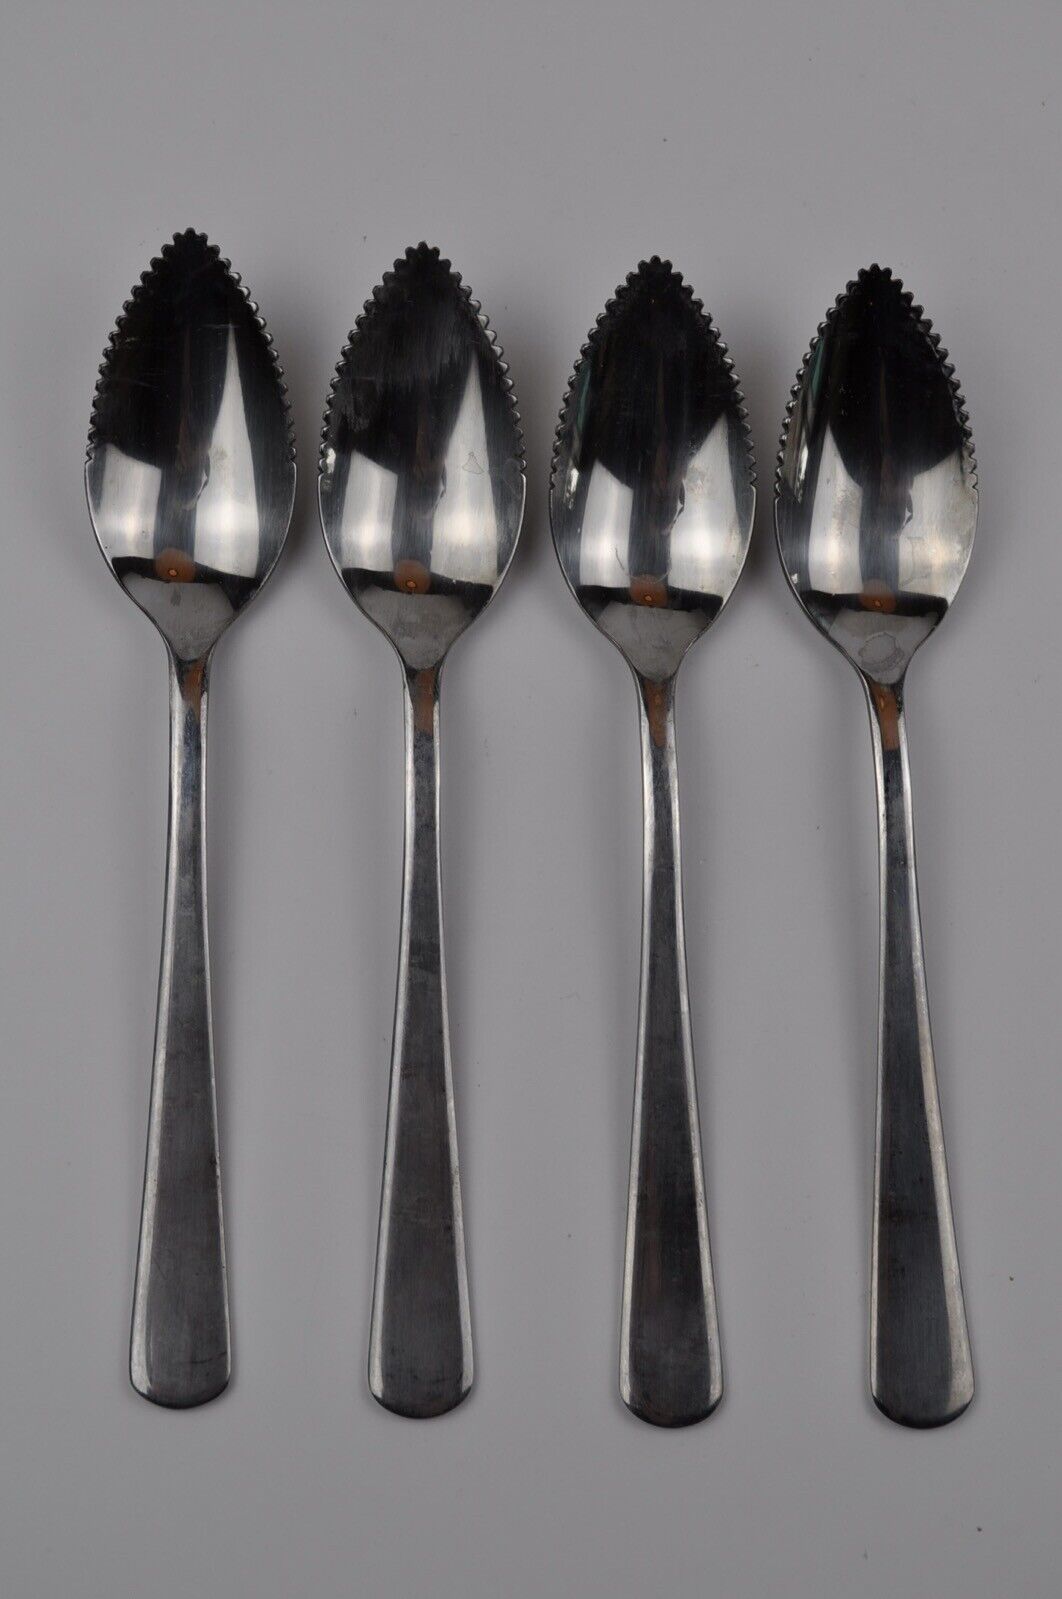 Grapefruit Spoons by Norpro Stainless Steel Serrated Edge Set of 4 